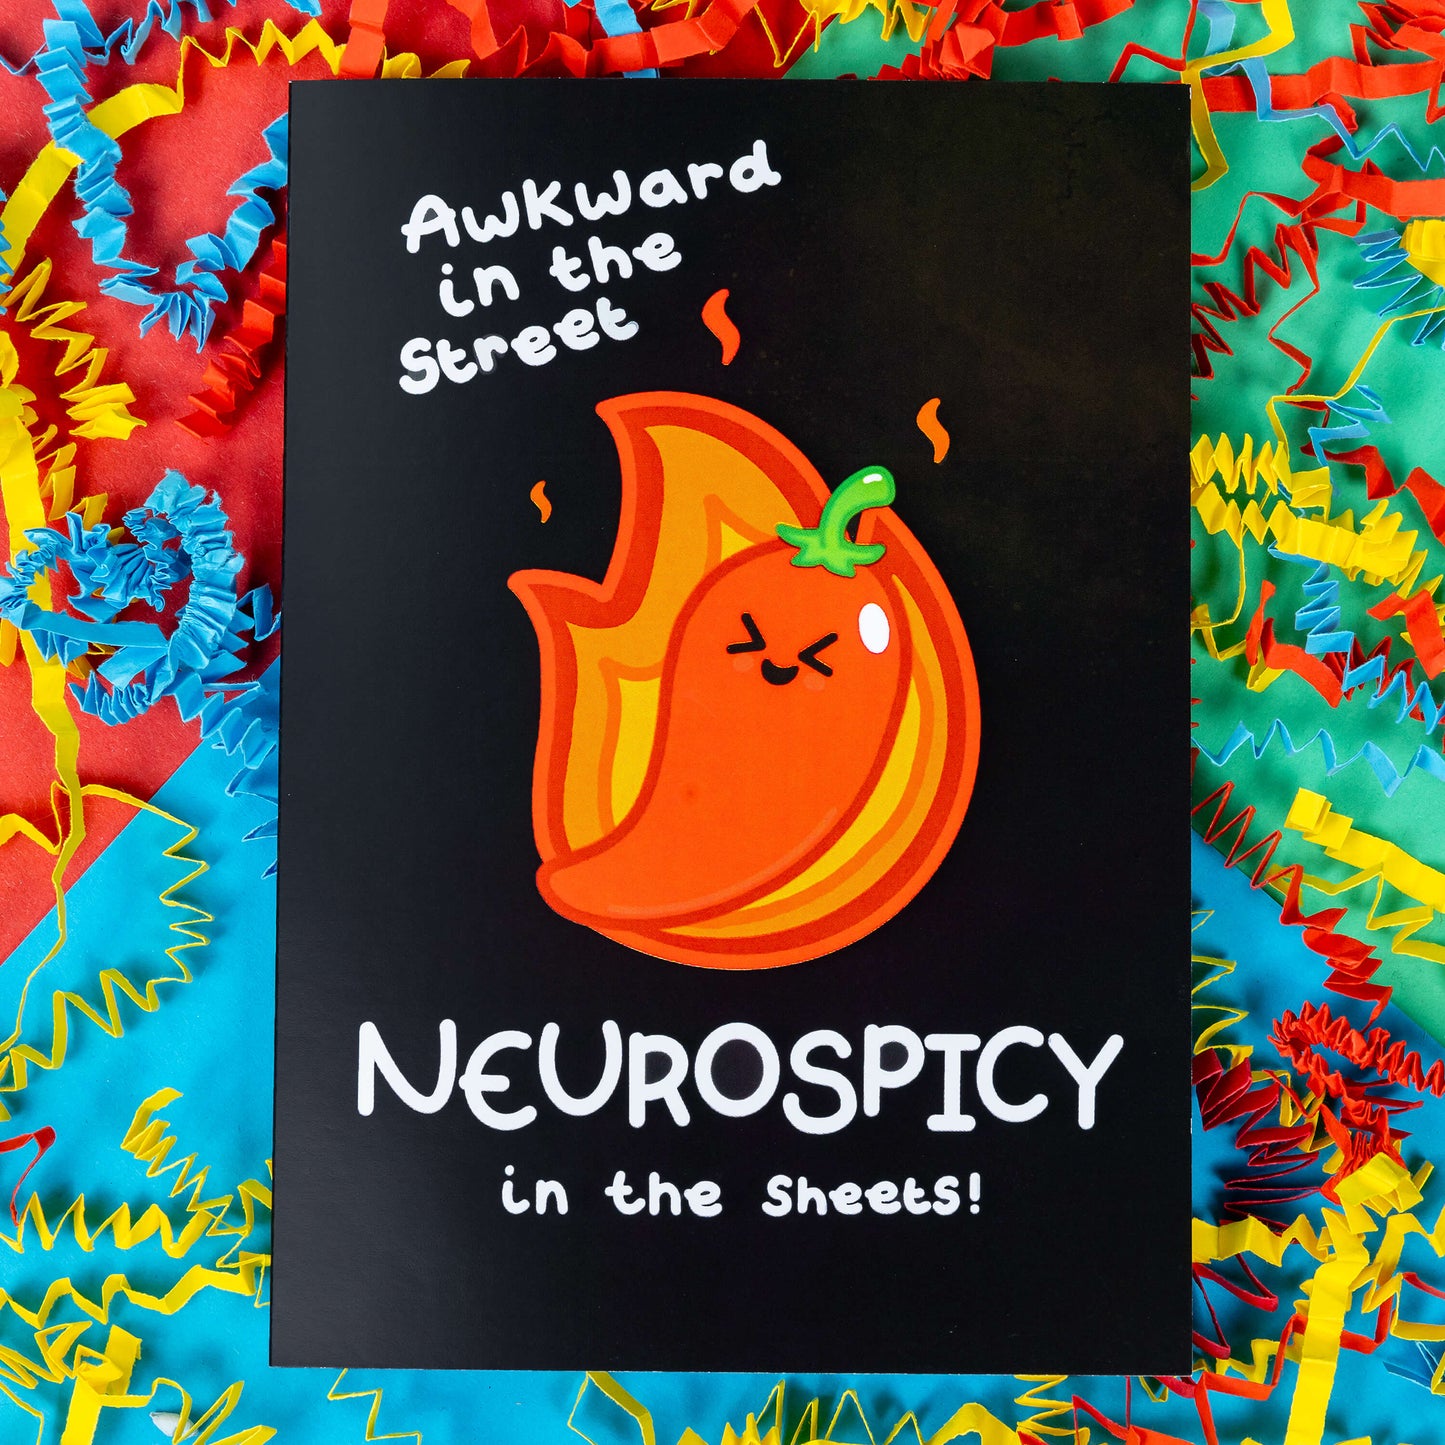 A black greeting card with a cute illustration of a red chilli pepper with scrunched up eyes and big smile. There is orange fire behind the chilli. 'Awkward in the street NEUROSPICY in the sheets!' is written on the card in white. The background of the photo is colourful card confetti. Design inspired by neurodivergent disorders.